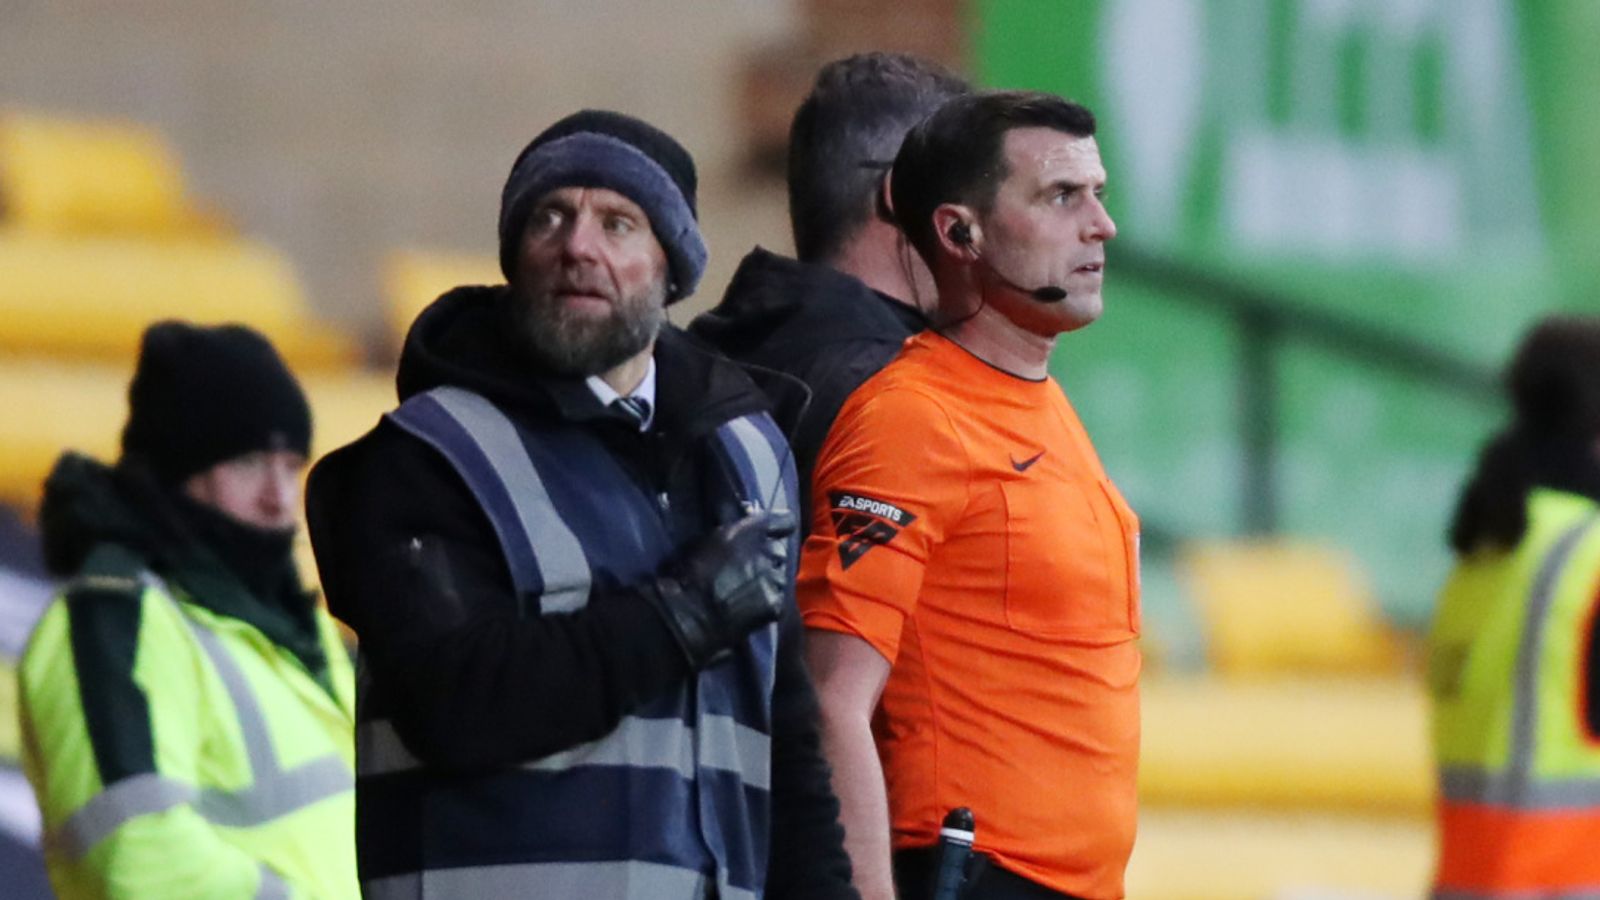 Referee Craig Hicks was chased off the pitch by a fan at Vale Park